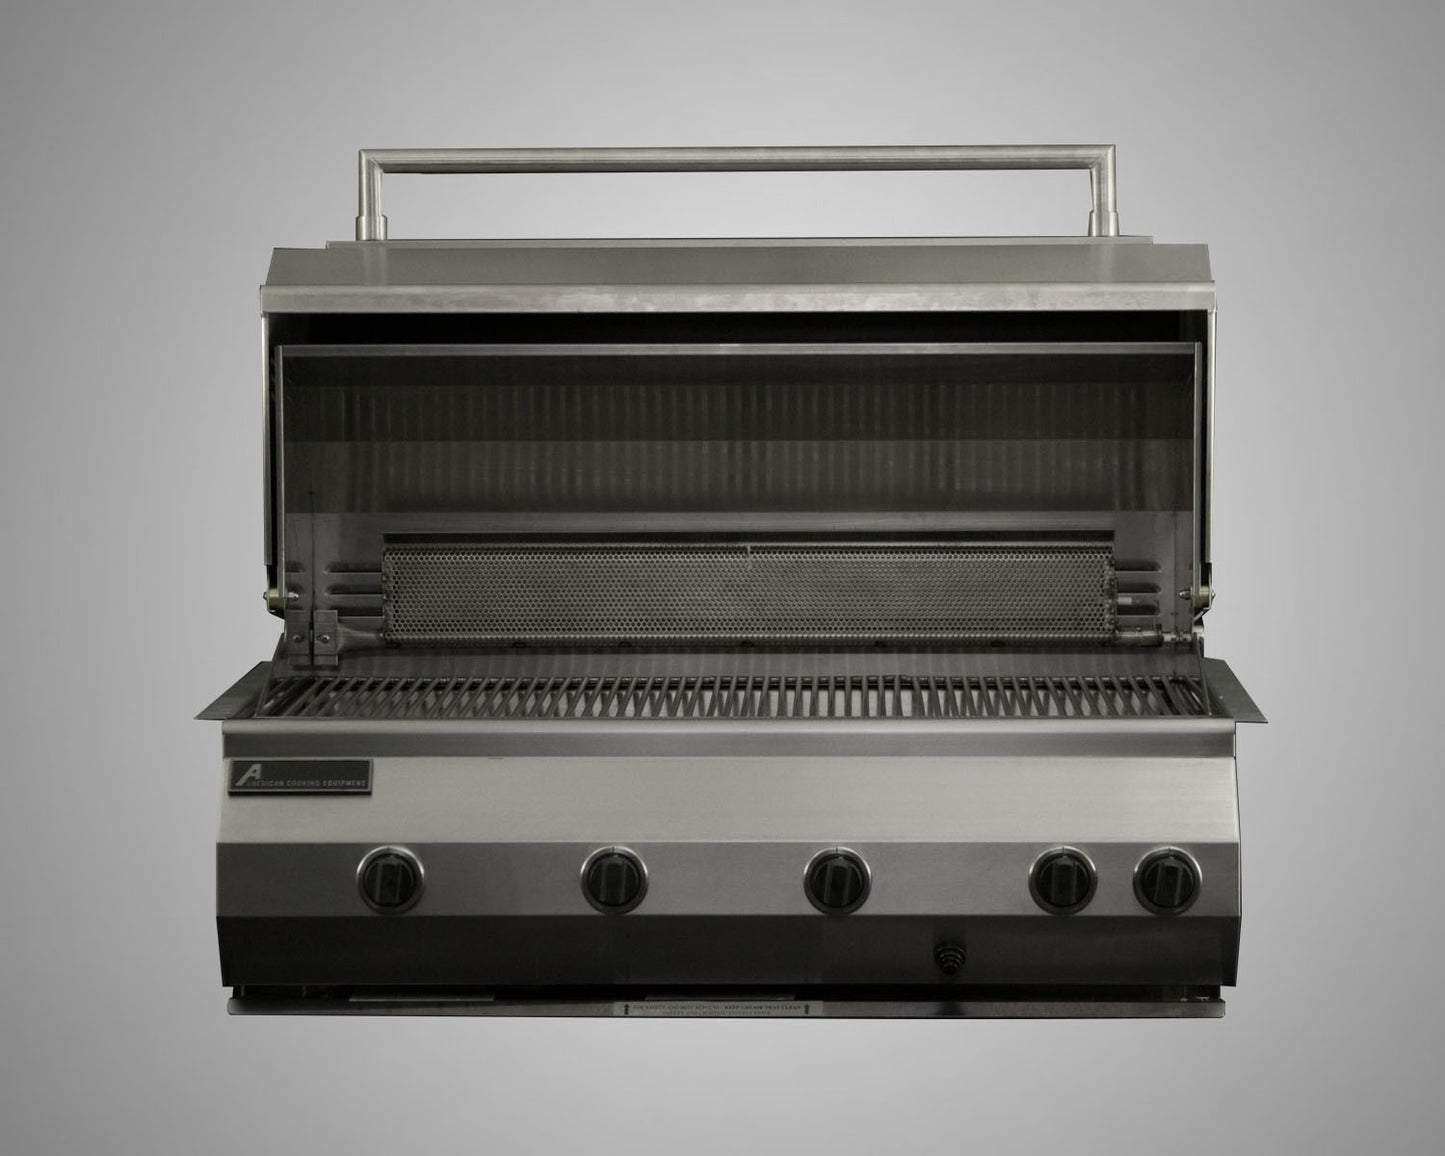 8 Burner Built-In Grill with Rotisserie